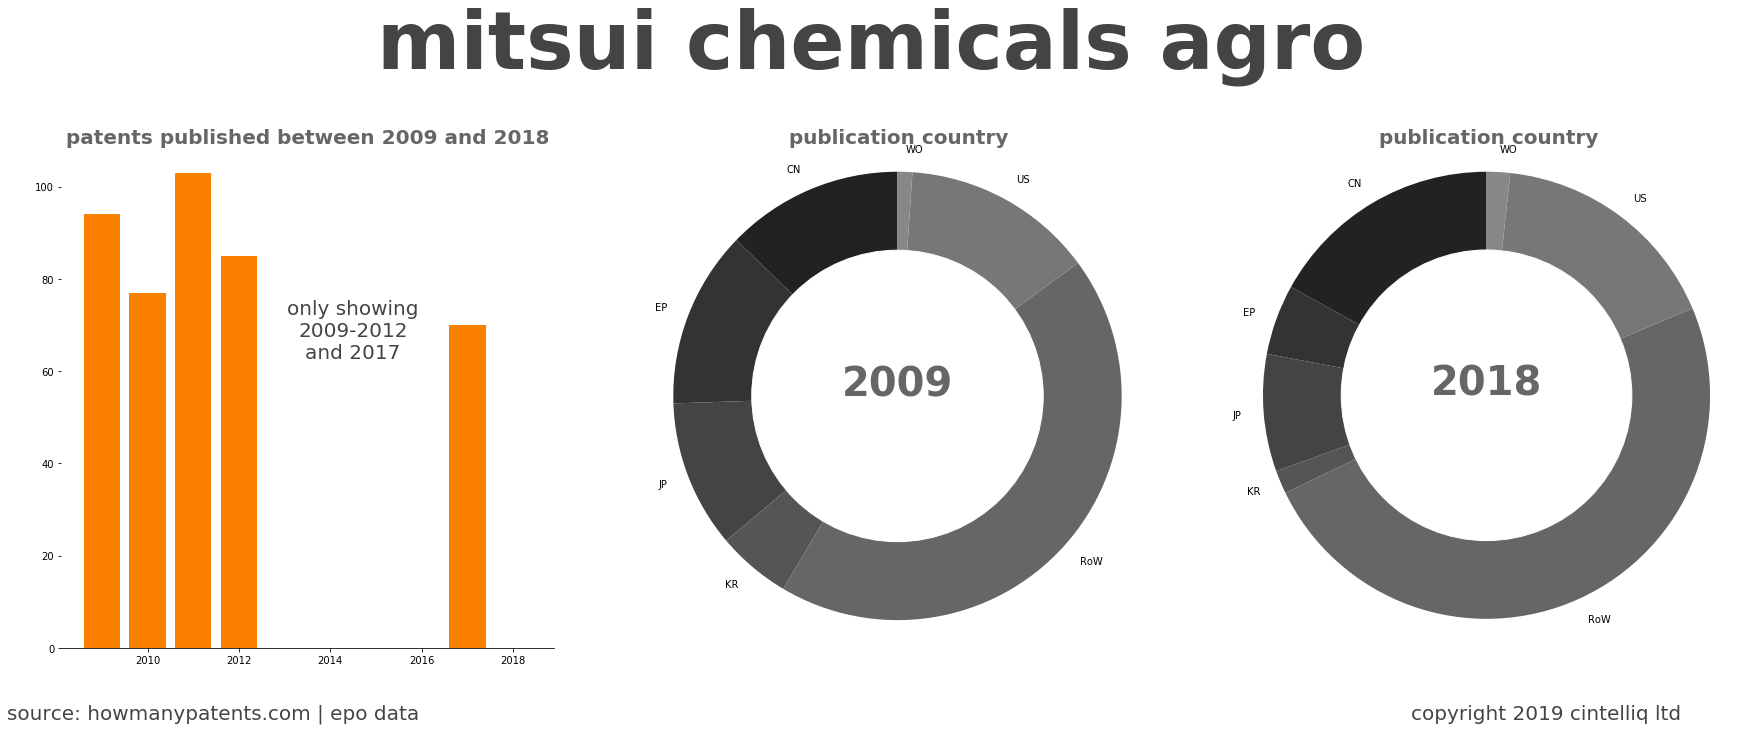 summary of patents for Mitsui Chemicals Agro